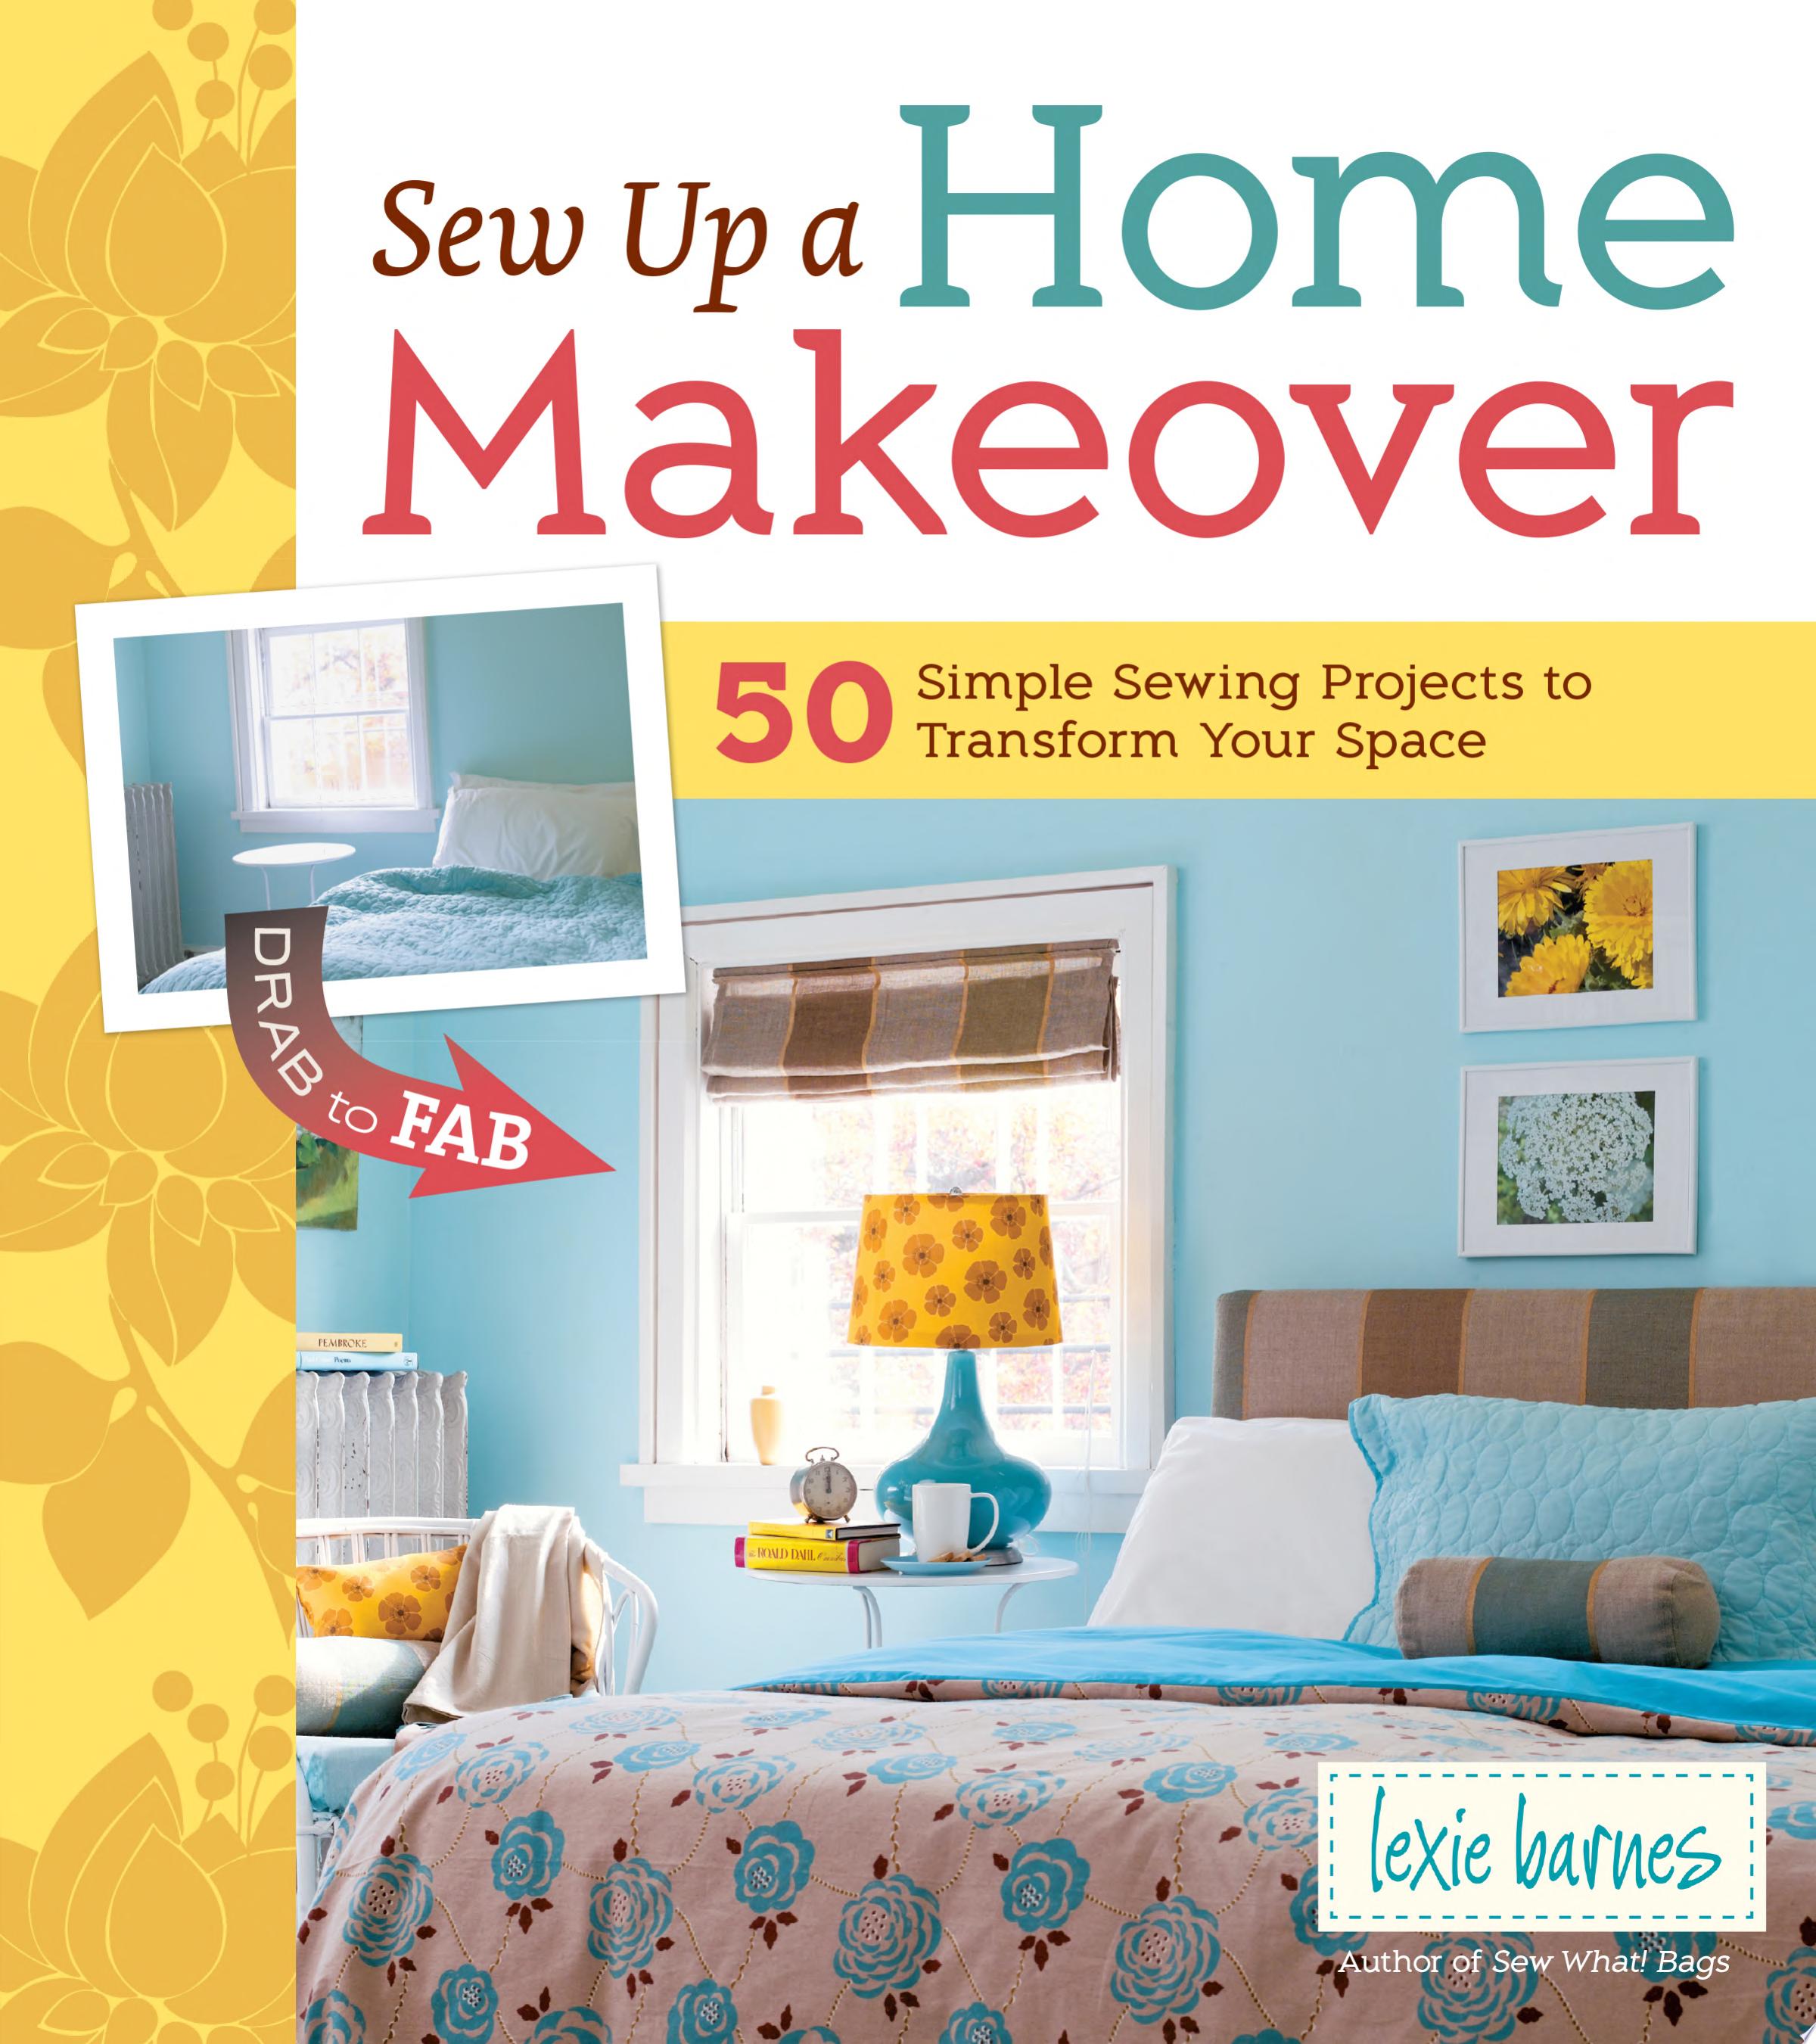 Image for "Sew Up a Home Makeover"